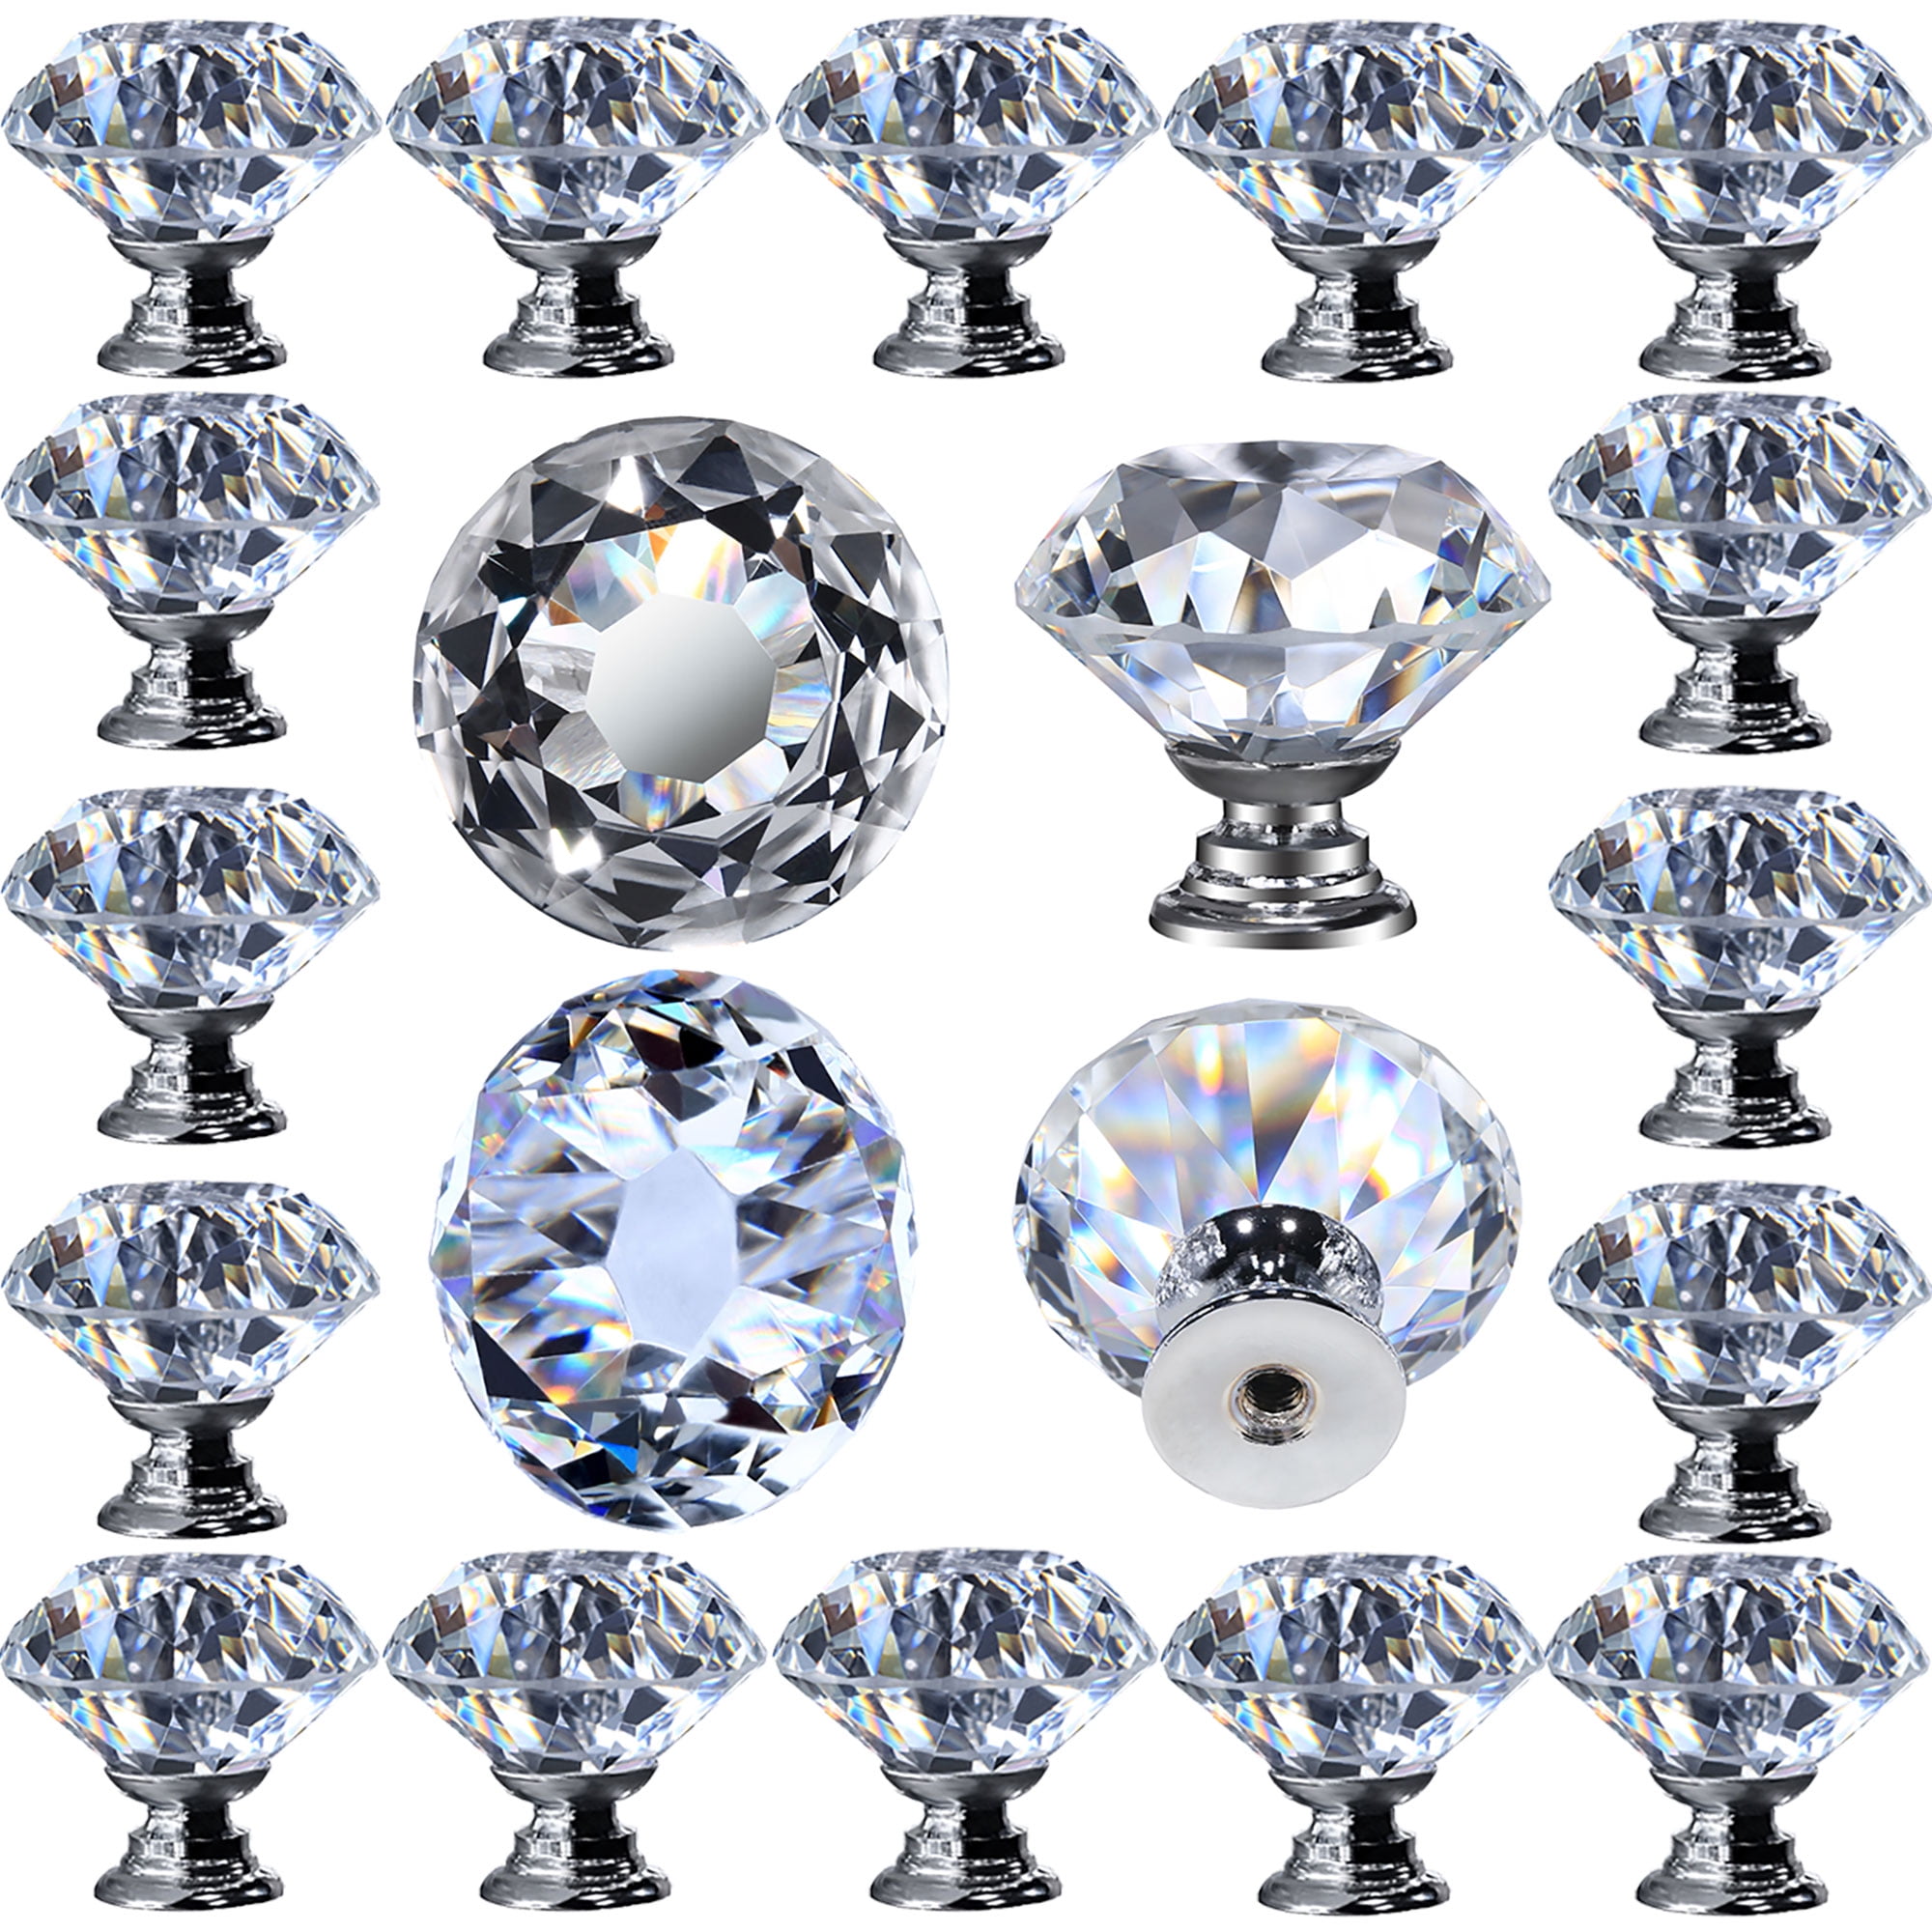 Door Hardware & Locks 10Pcs-Set 25MM Durable Luxury Multicolor Rose Flower Clear Crystal Glass Knobs with Polished Silver Color Base Cabinet Cupboard Dresser Closet Kitchen Drawer Pull Handles 